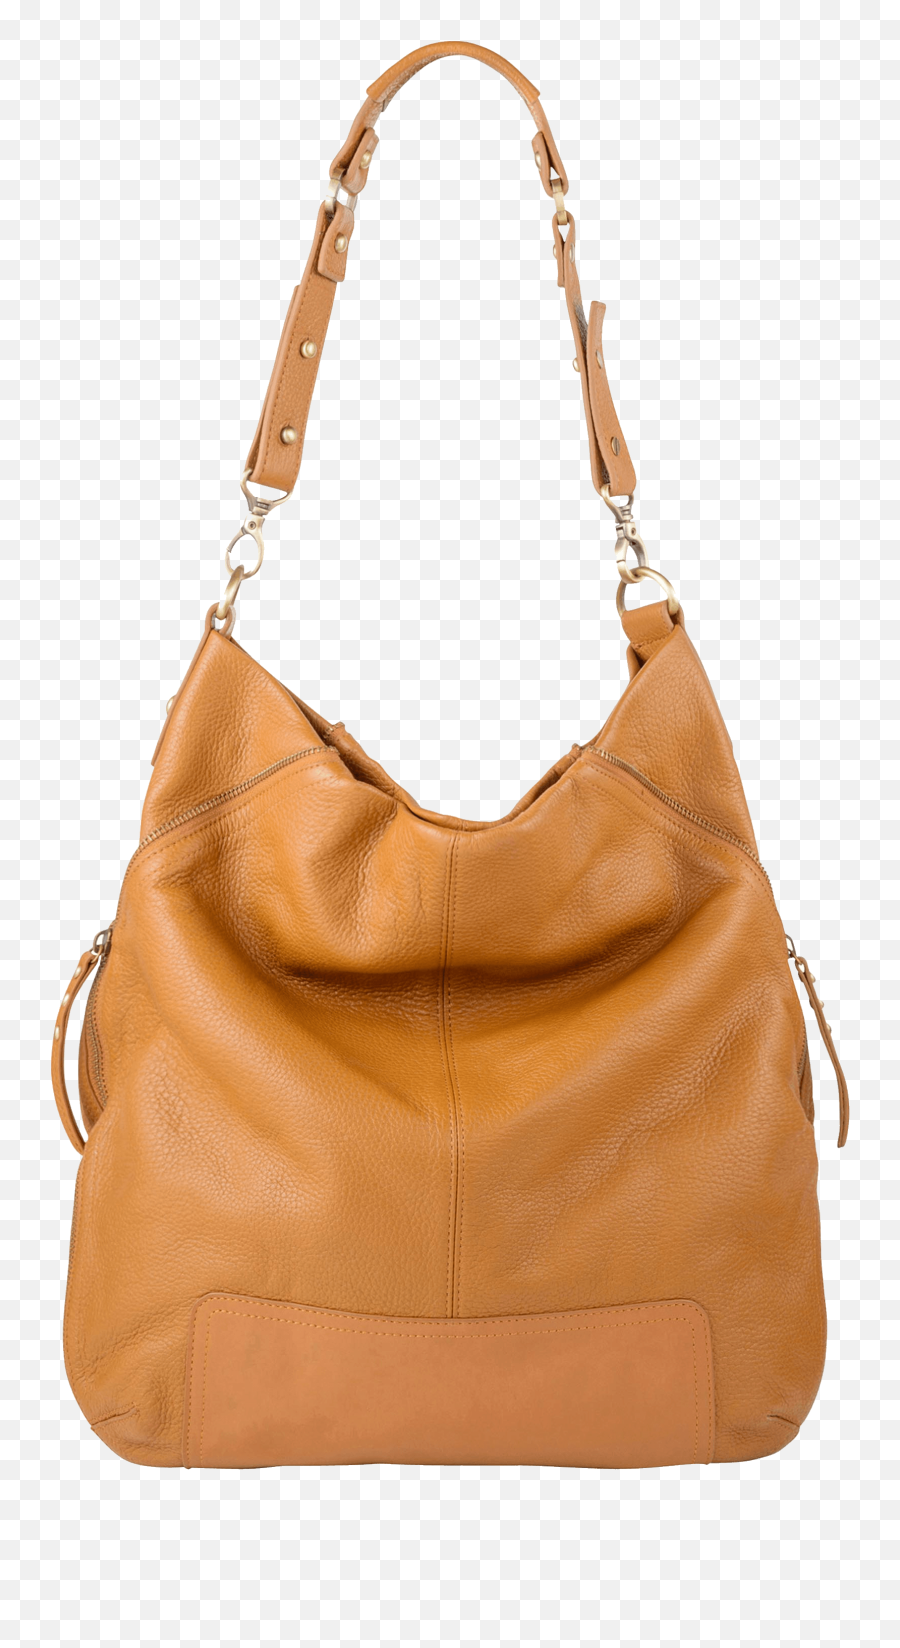 Women Bag Png - Women Hand Bag Sleeve Bag Free Download Status Anxiety Bags Nz,Leather Png